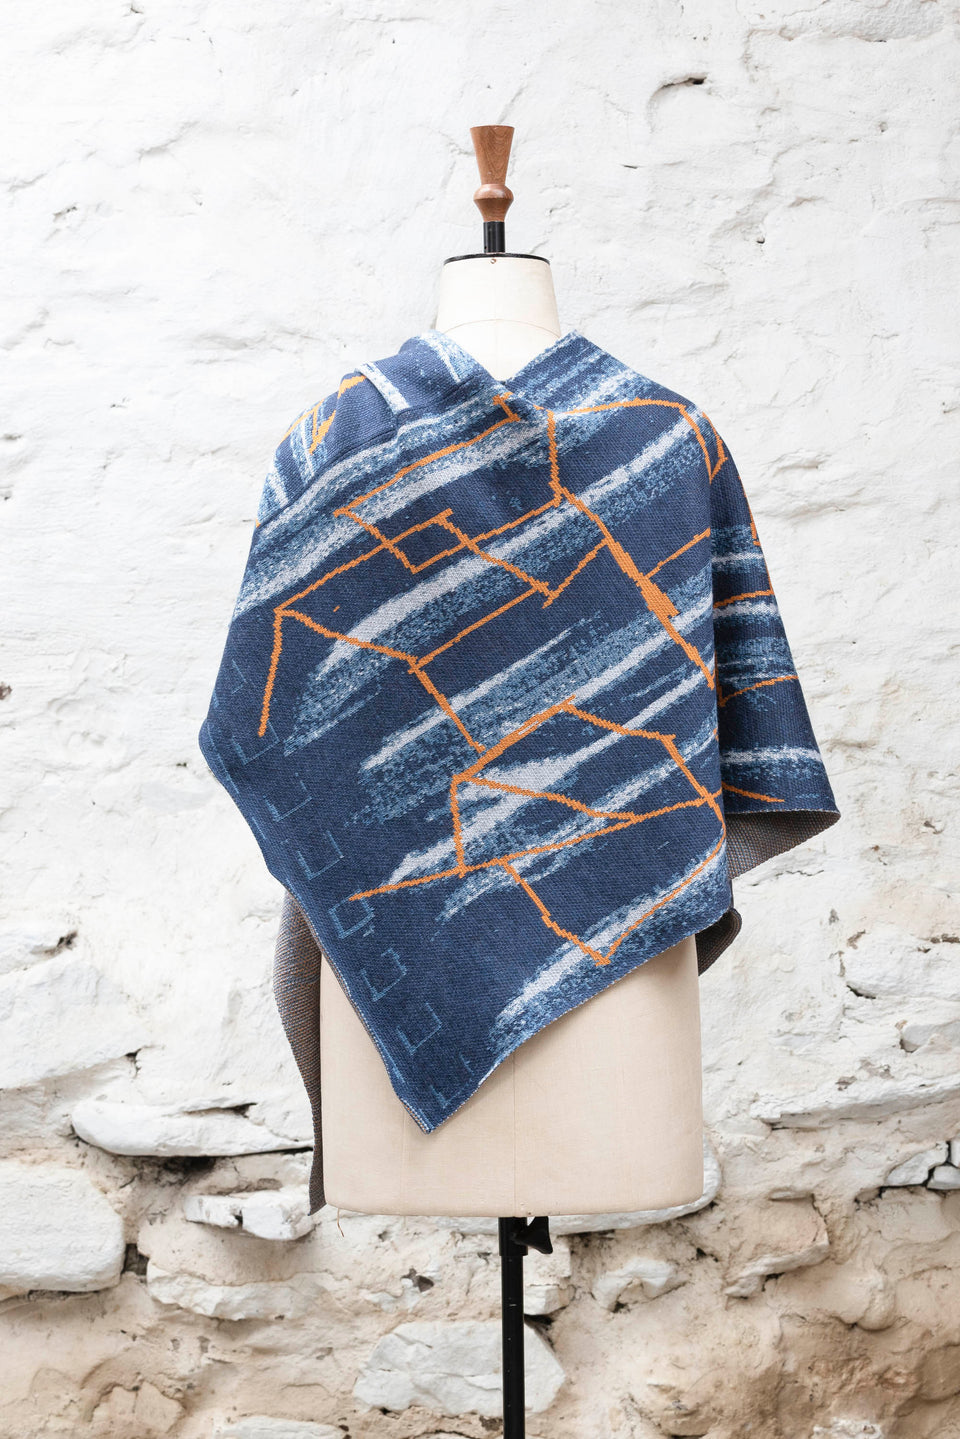 A knitted poncho, made in Shetland in a contemporary design by Nielanell with abstract blues and orange linear marks. Shown from the back, and with the neck arranged as a V, on a vintage mannequin against a rustic white washed wall